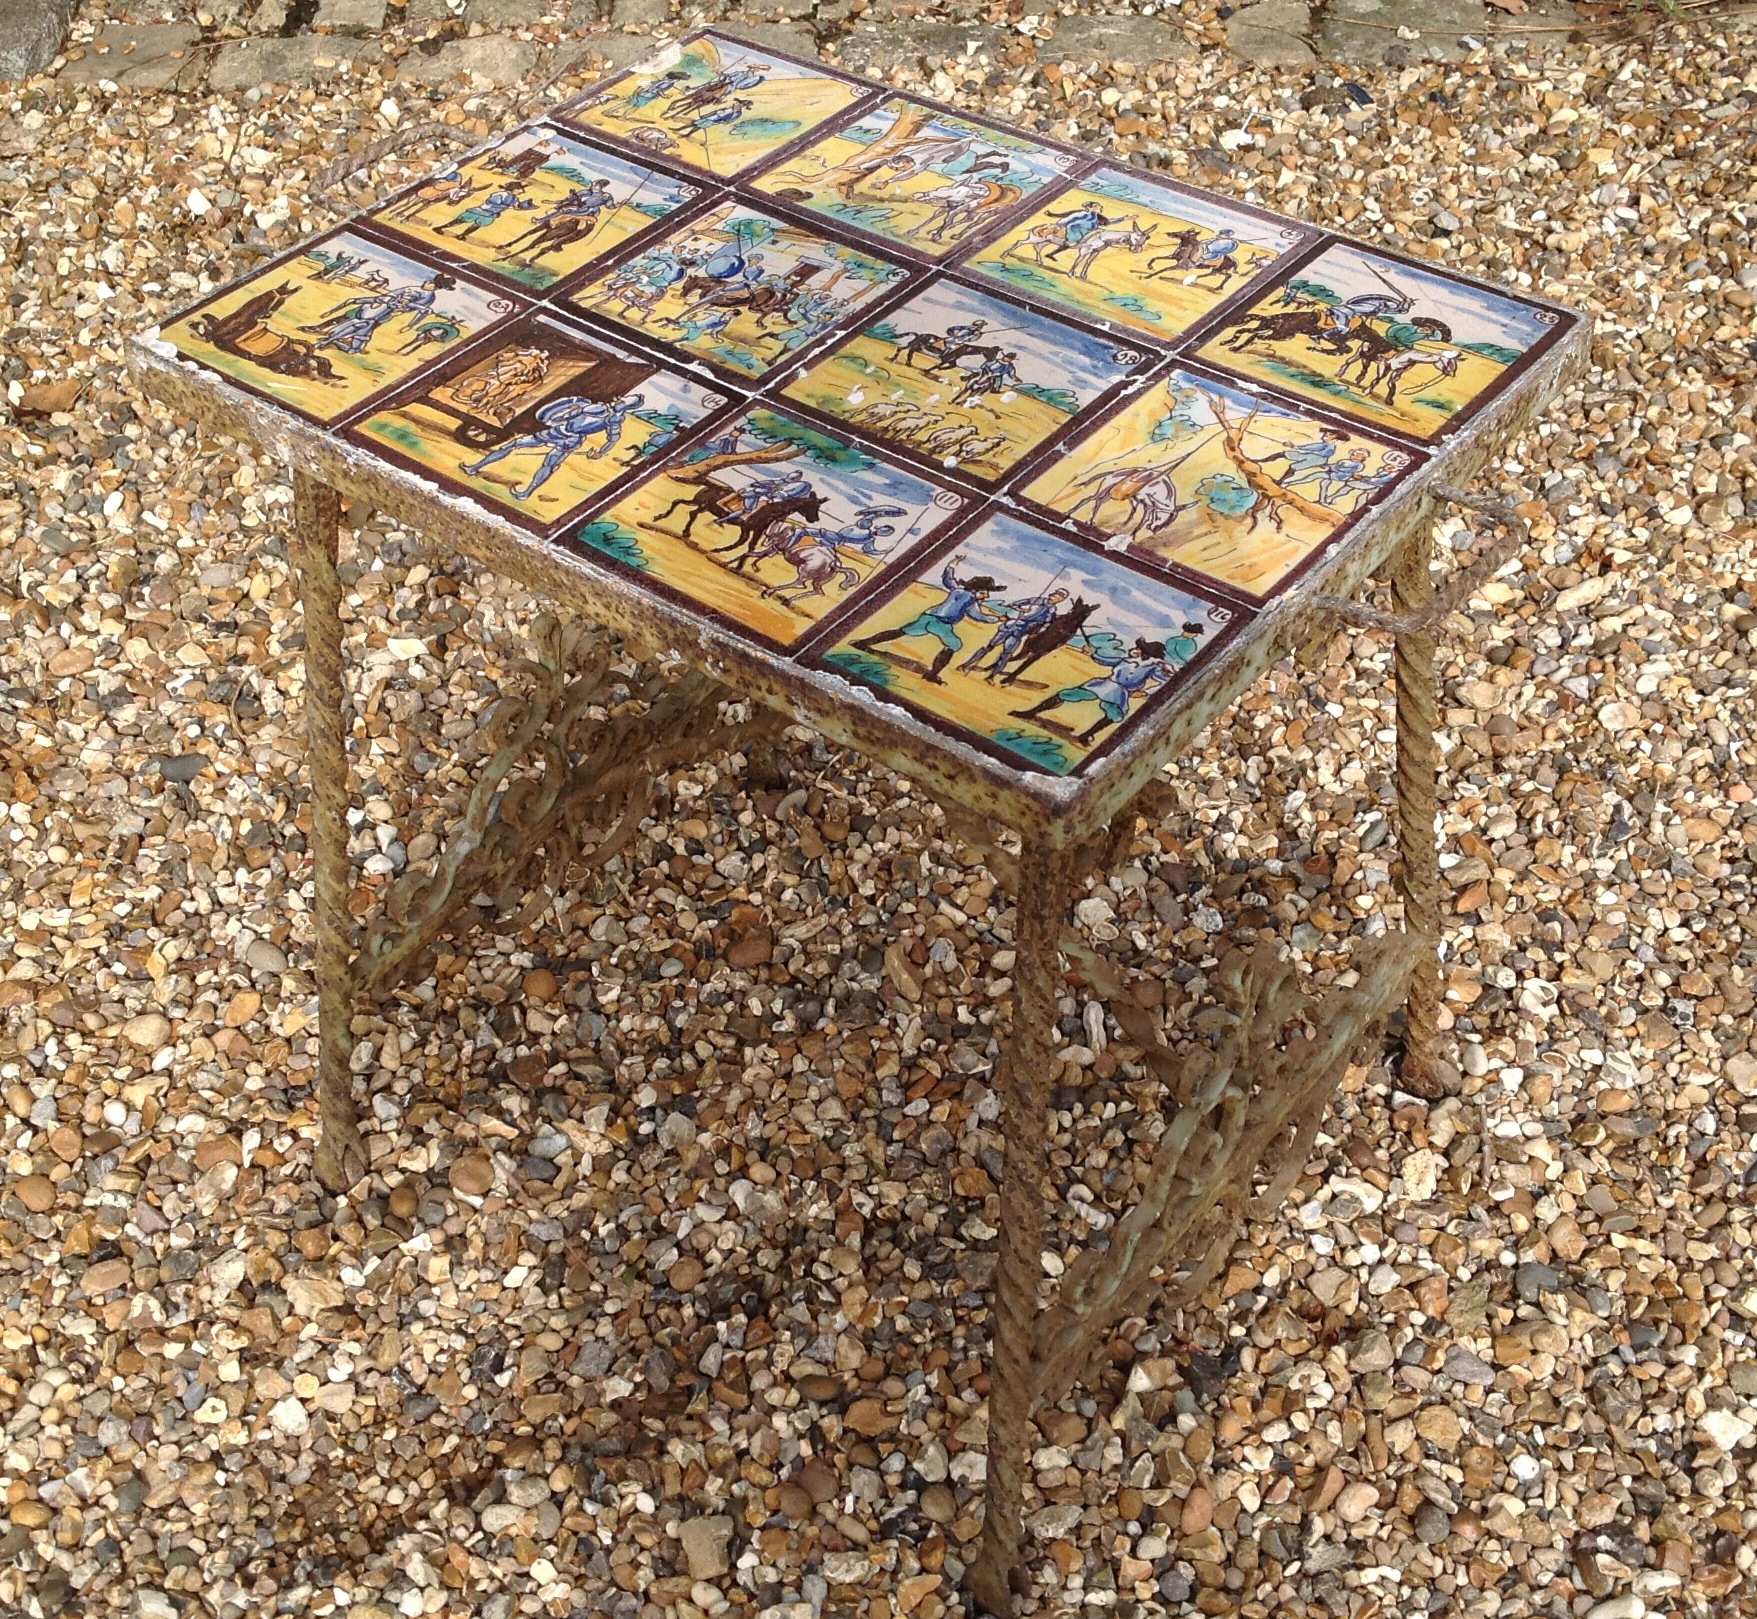 A 19TH CENTURY SIDE TABLEinset with various pictorial tiles, supported on a decorative wrought